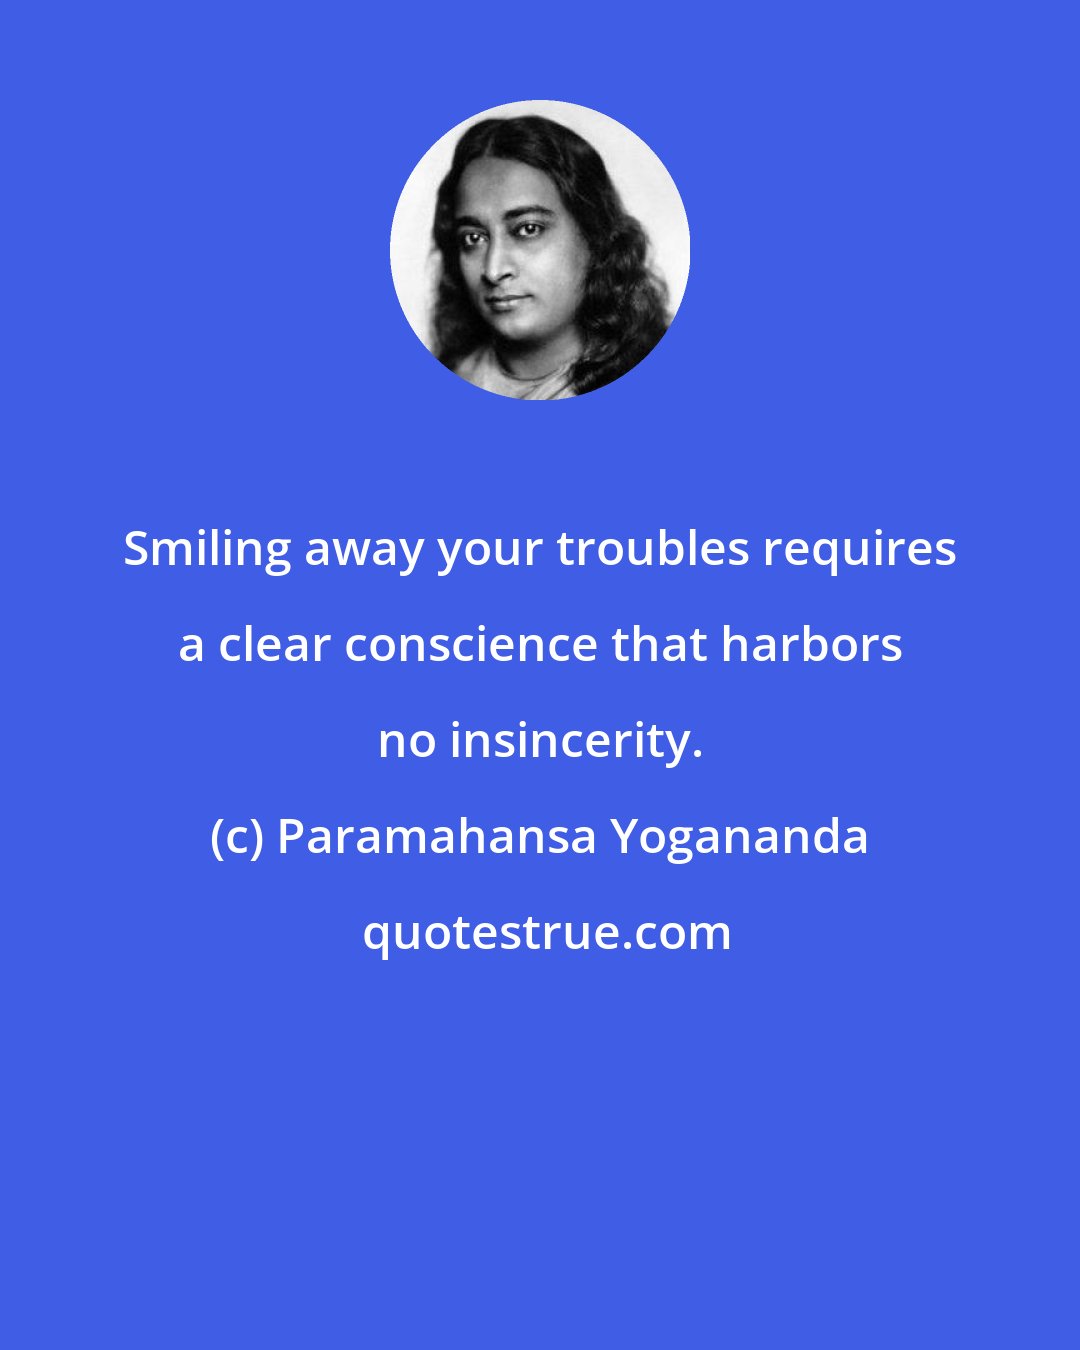 Paramahansa Yogananda: Smiling away your troubles requires a clear conscience that harbors no insincerity.